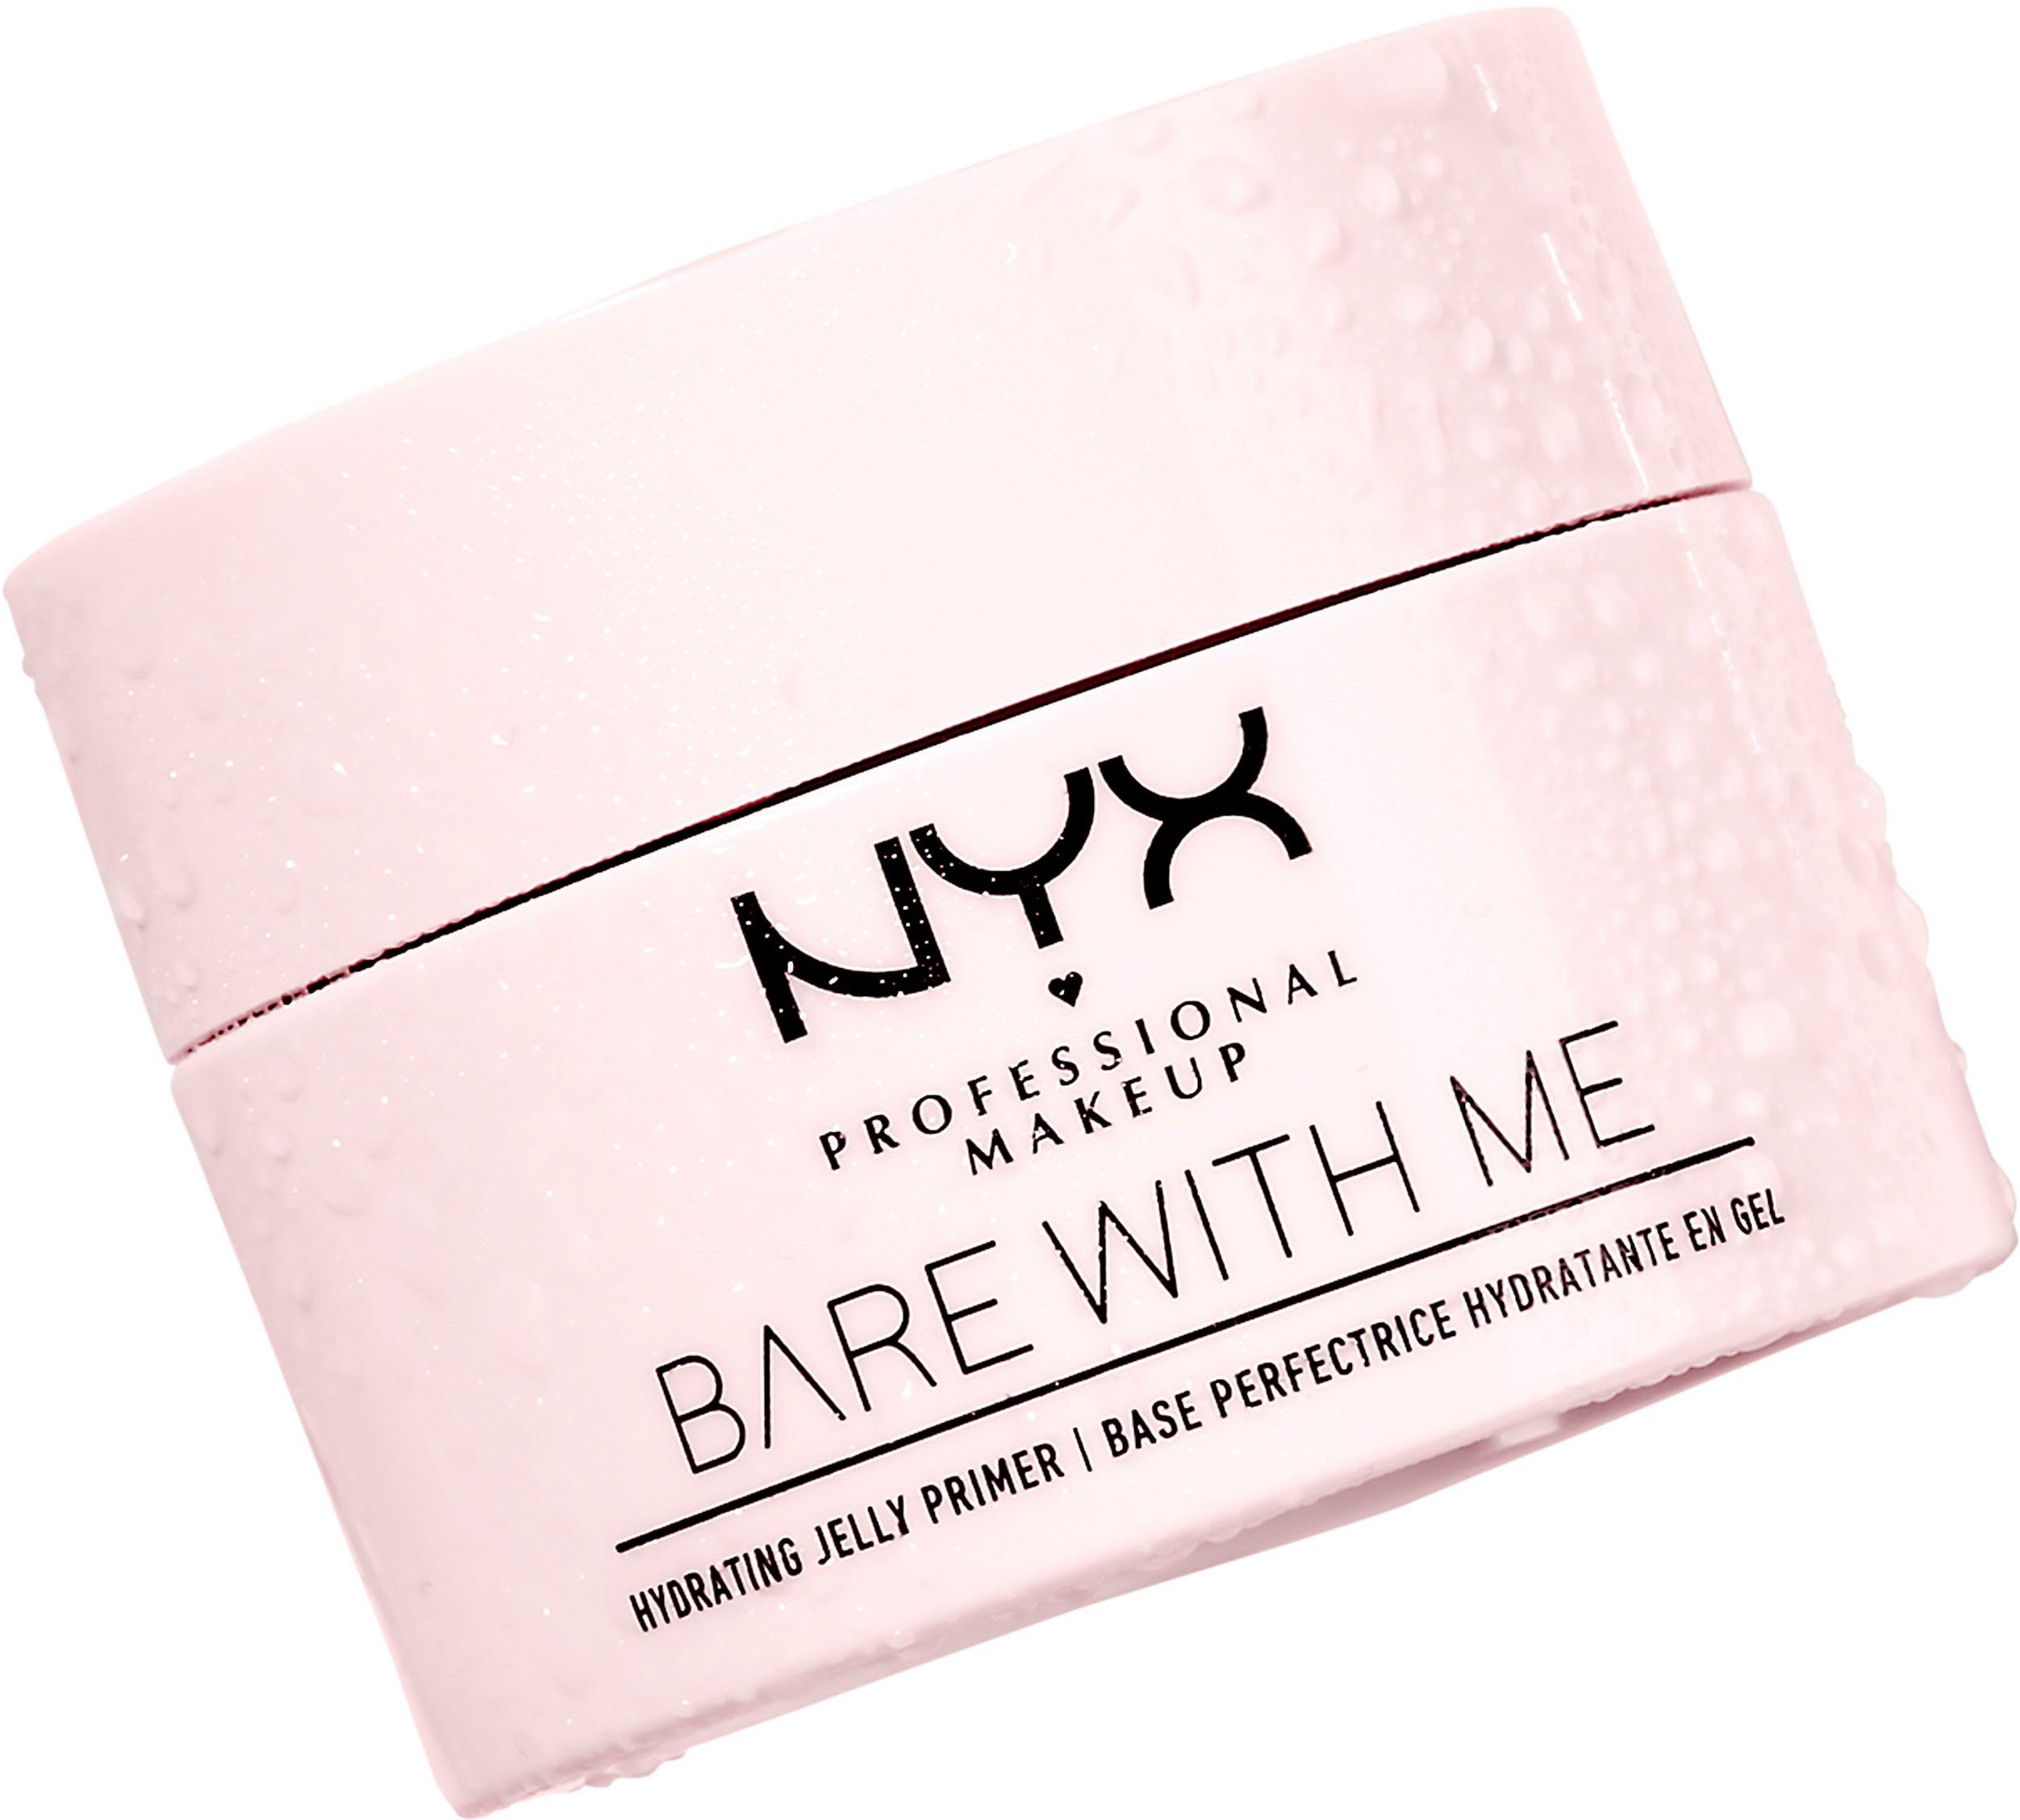 Neueste empfohlene Informationen NYX Primer Professional NYX Makeup Bare Primer Jelly Hydrating With Me